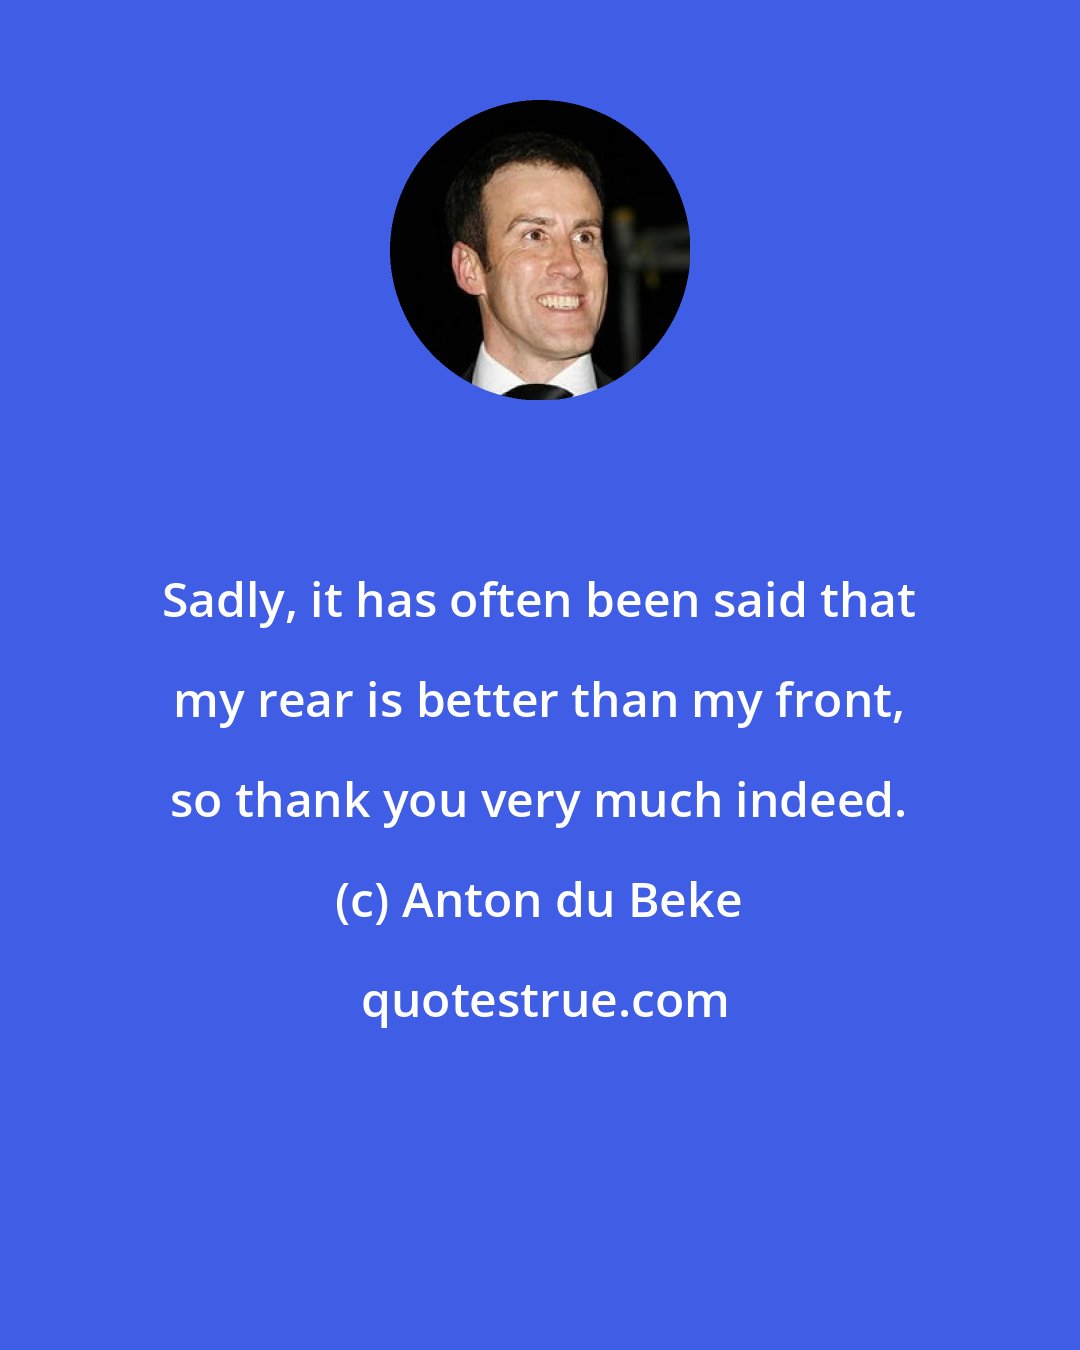 Anton du Beke: Sadly, it has often been said that my rear is better than my front, so thank you very much indeed.